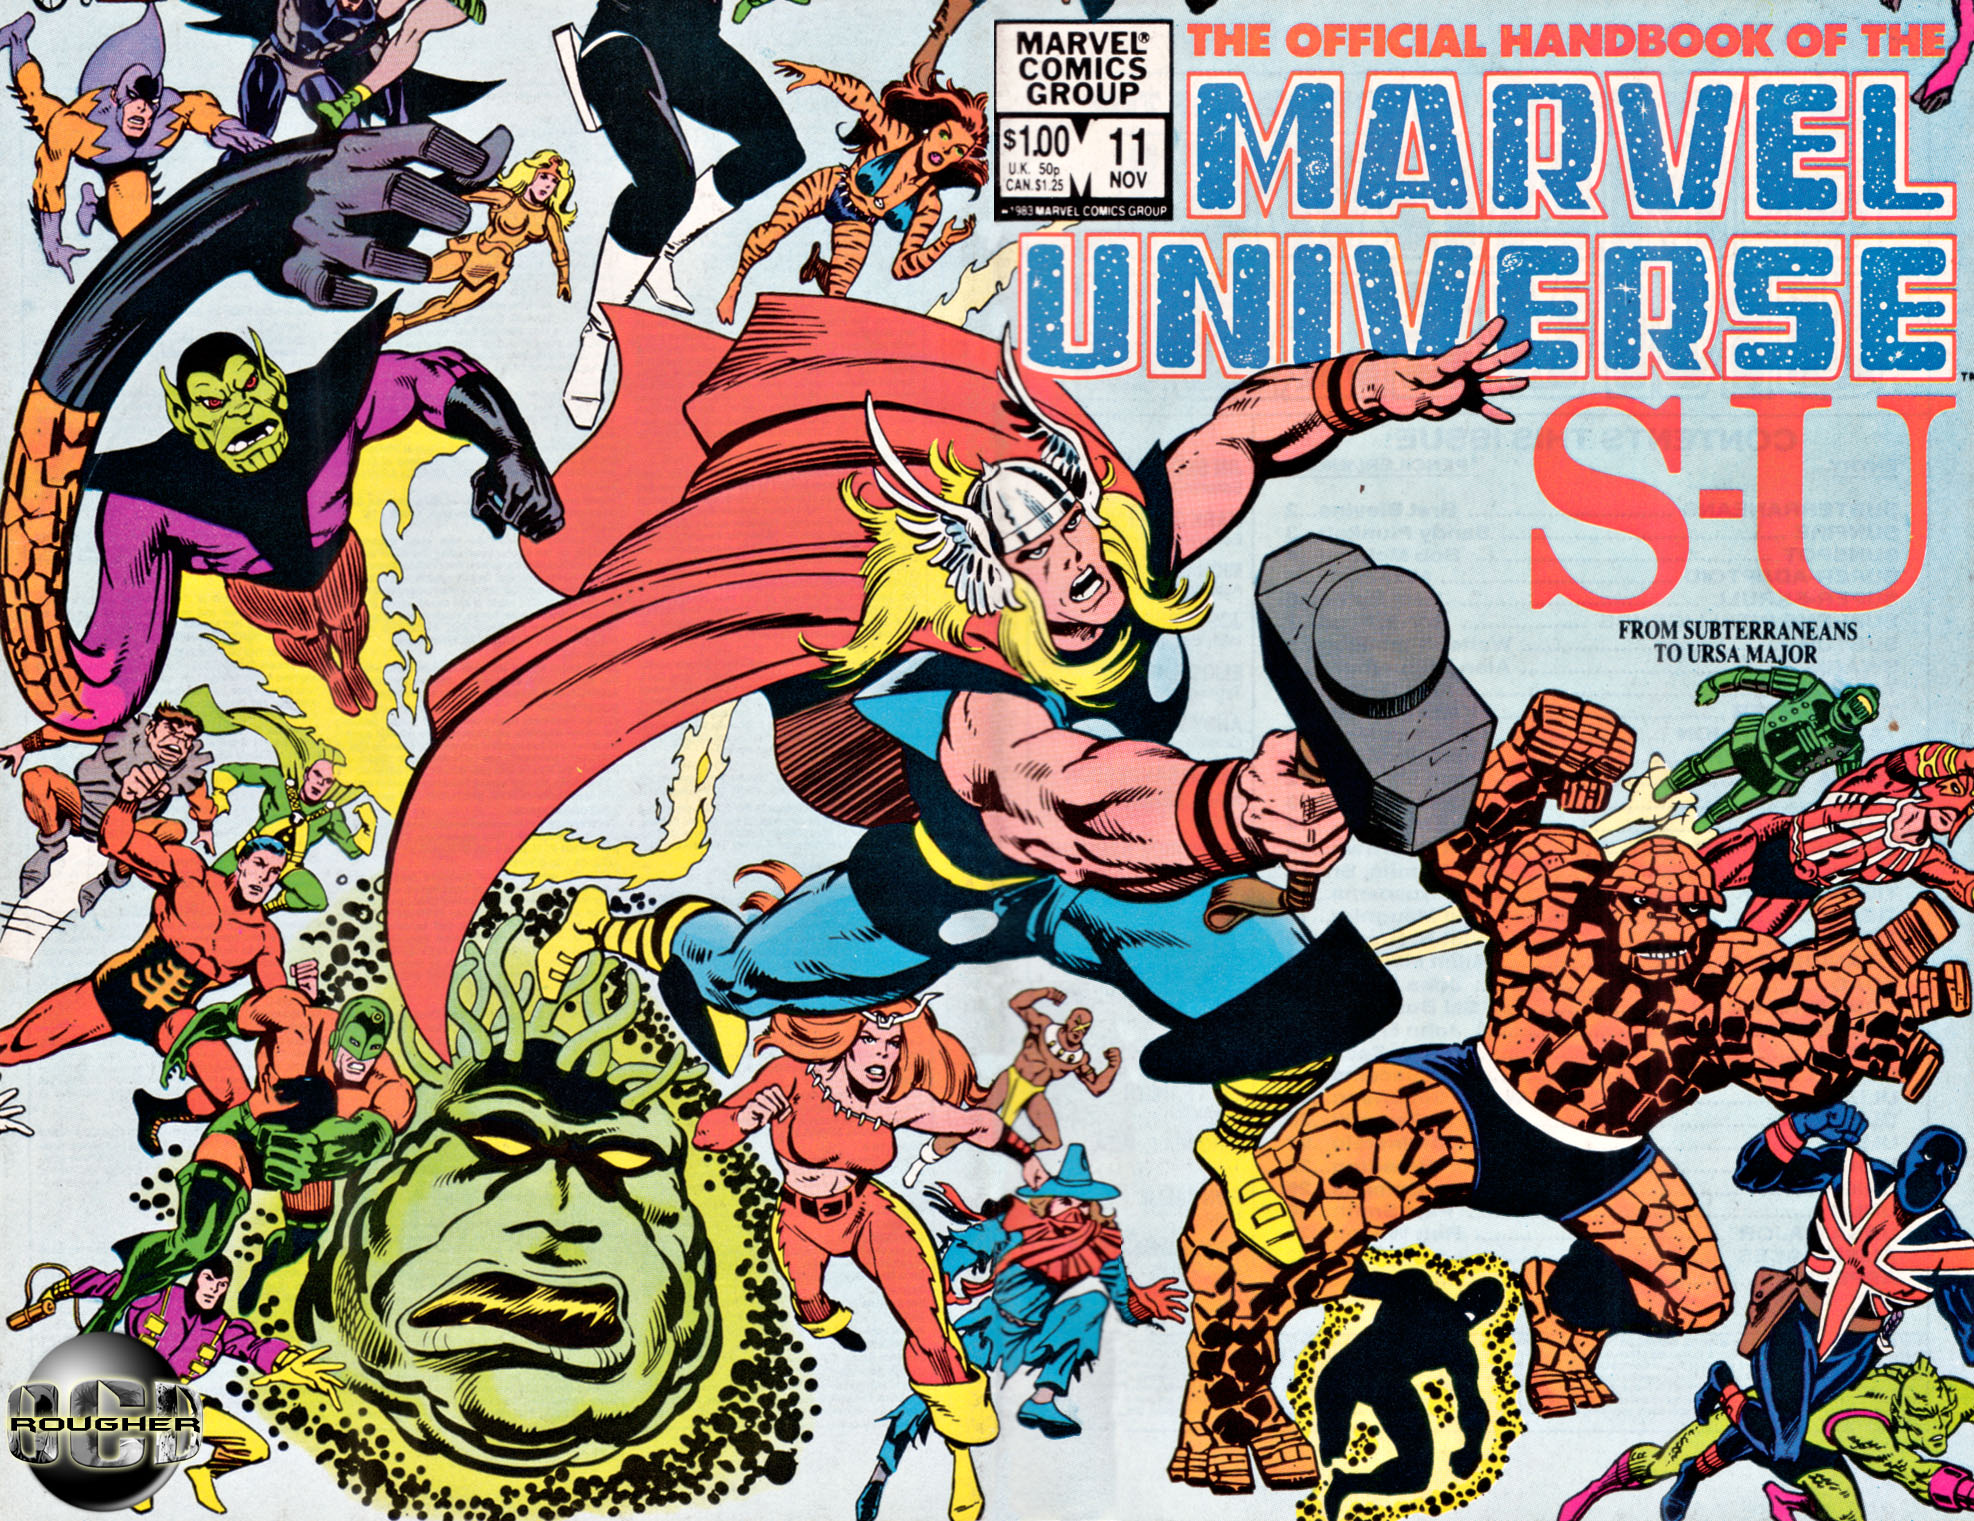 Read online The Official Handbook of the Marvel Universe comic -  Issue #11 - 1